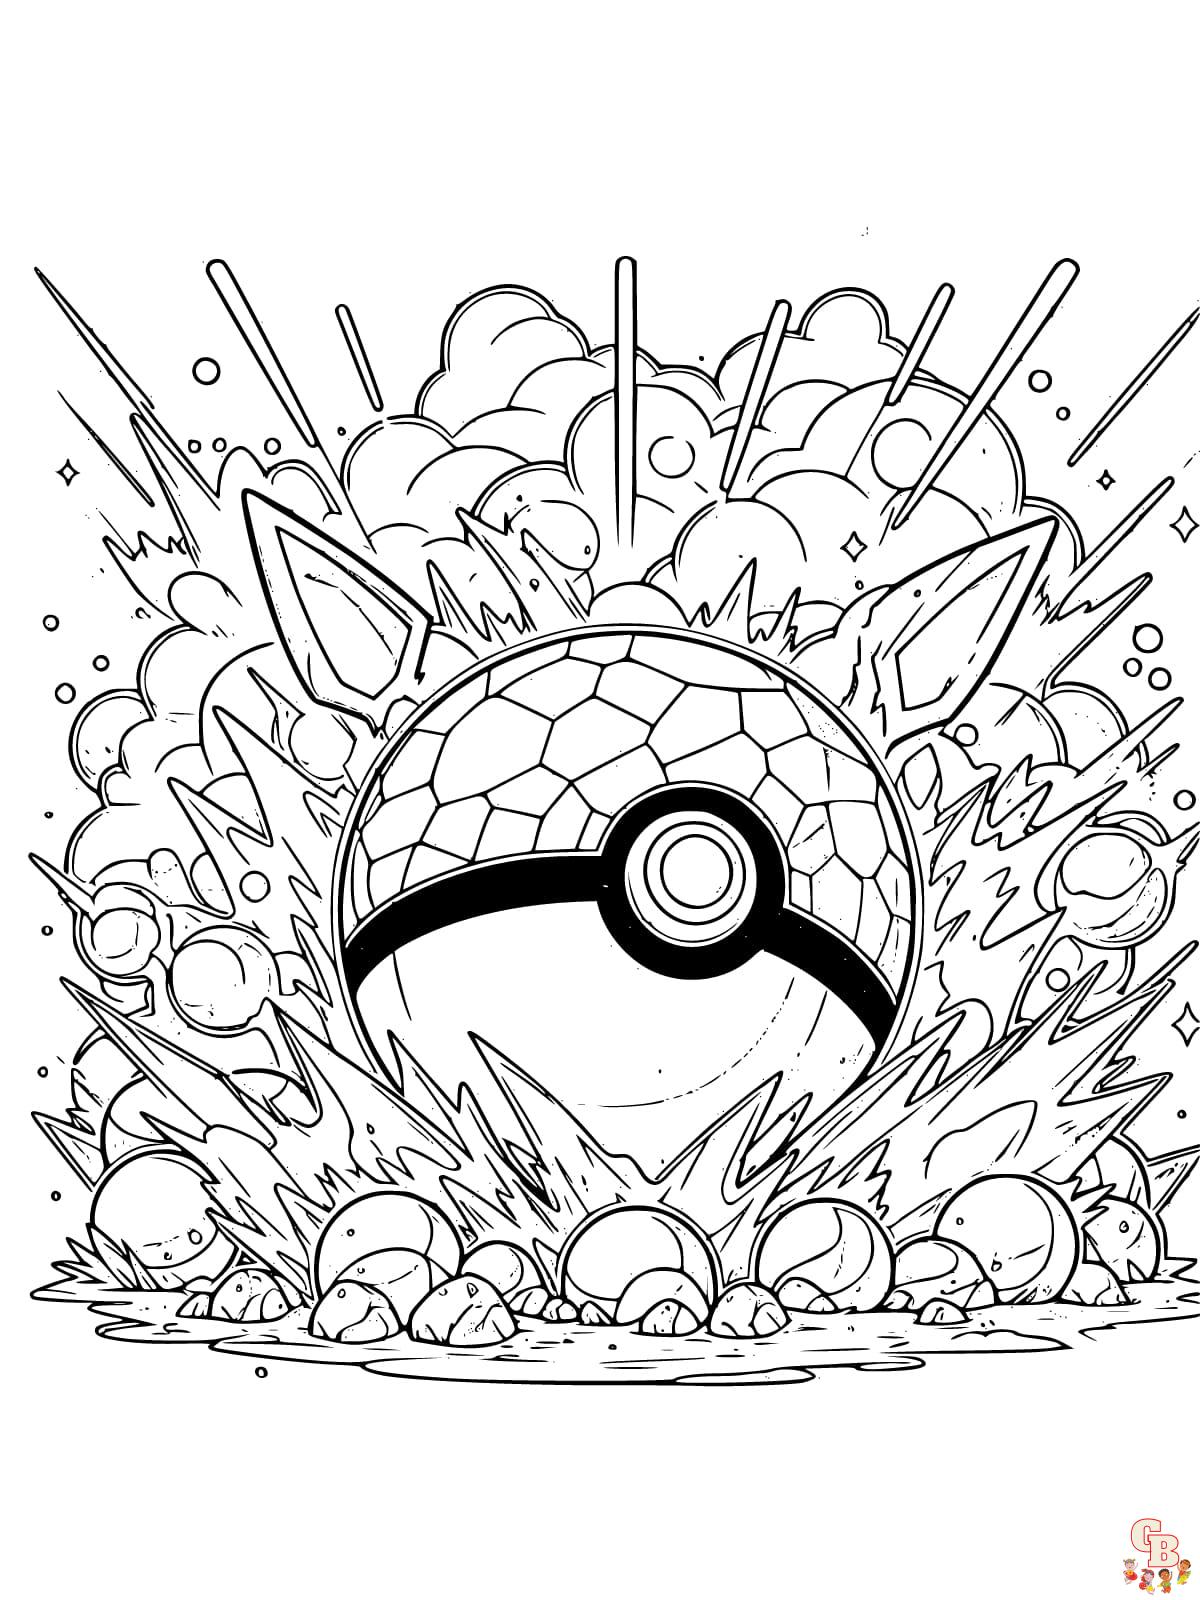 pokemon ball coloring pages